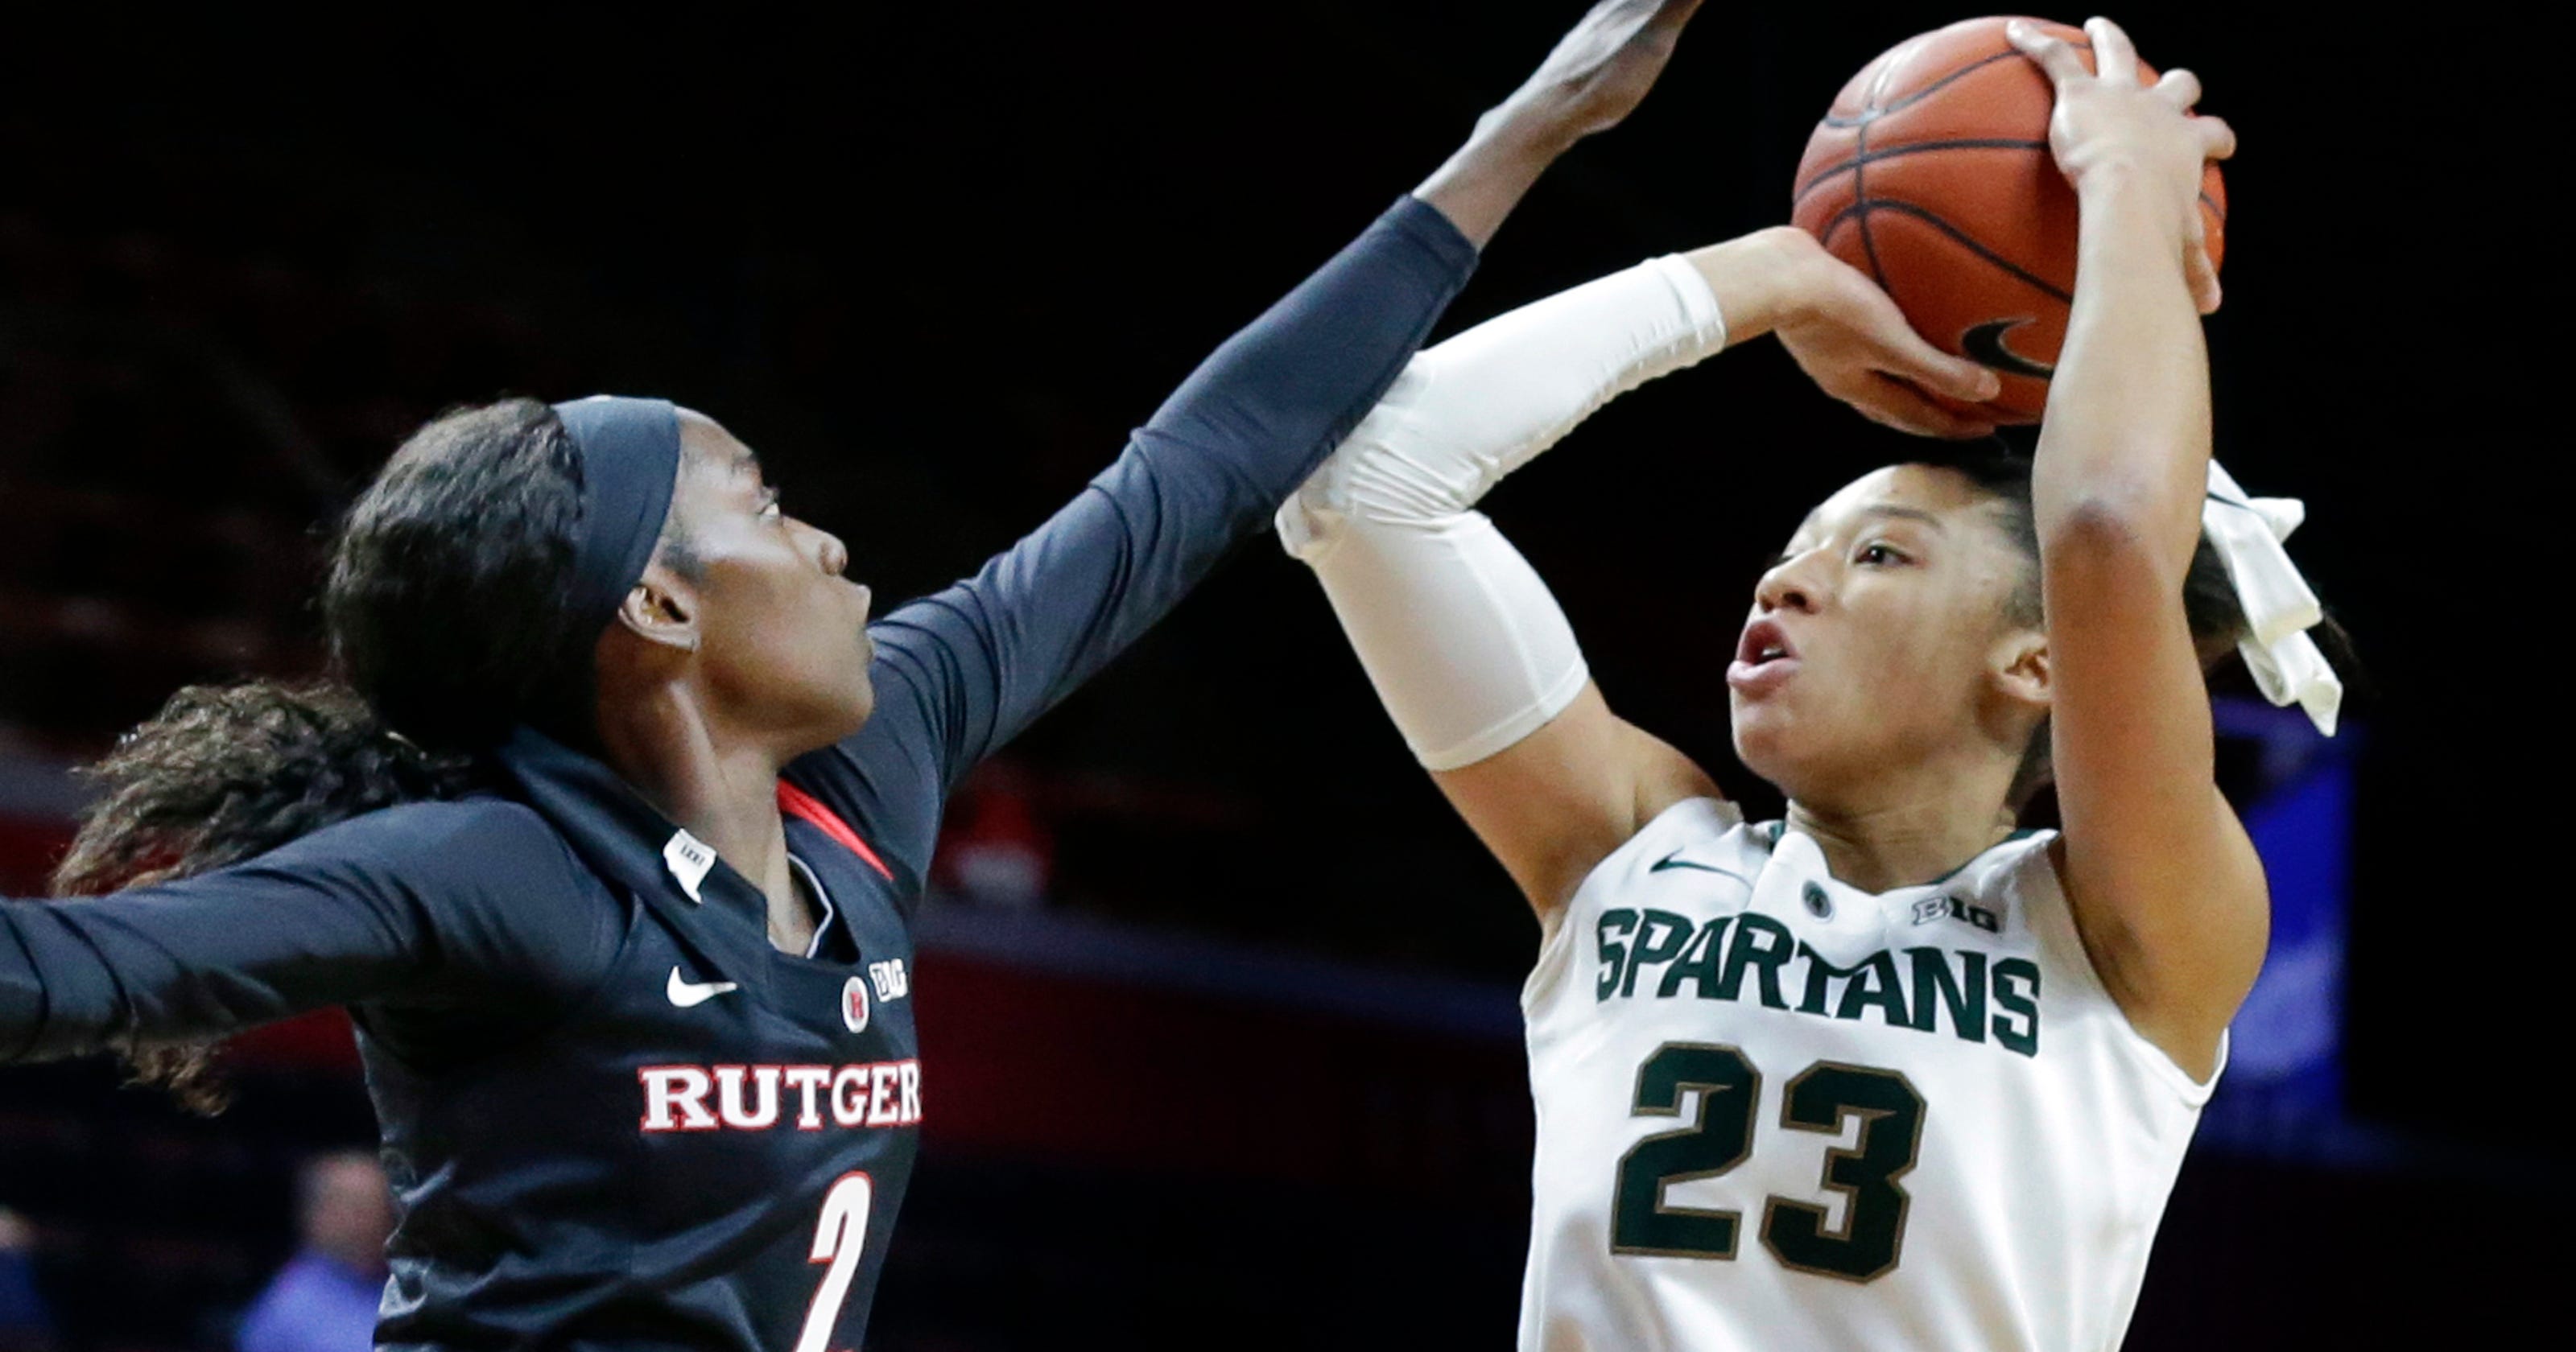 Aerial Powers scheduled to attend WNBA draft